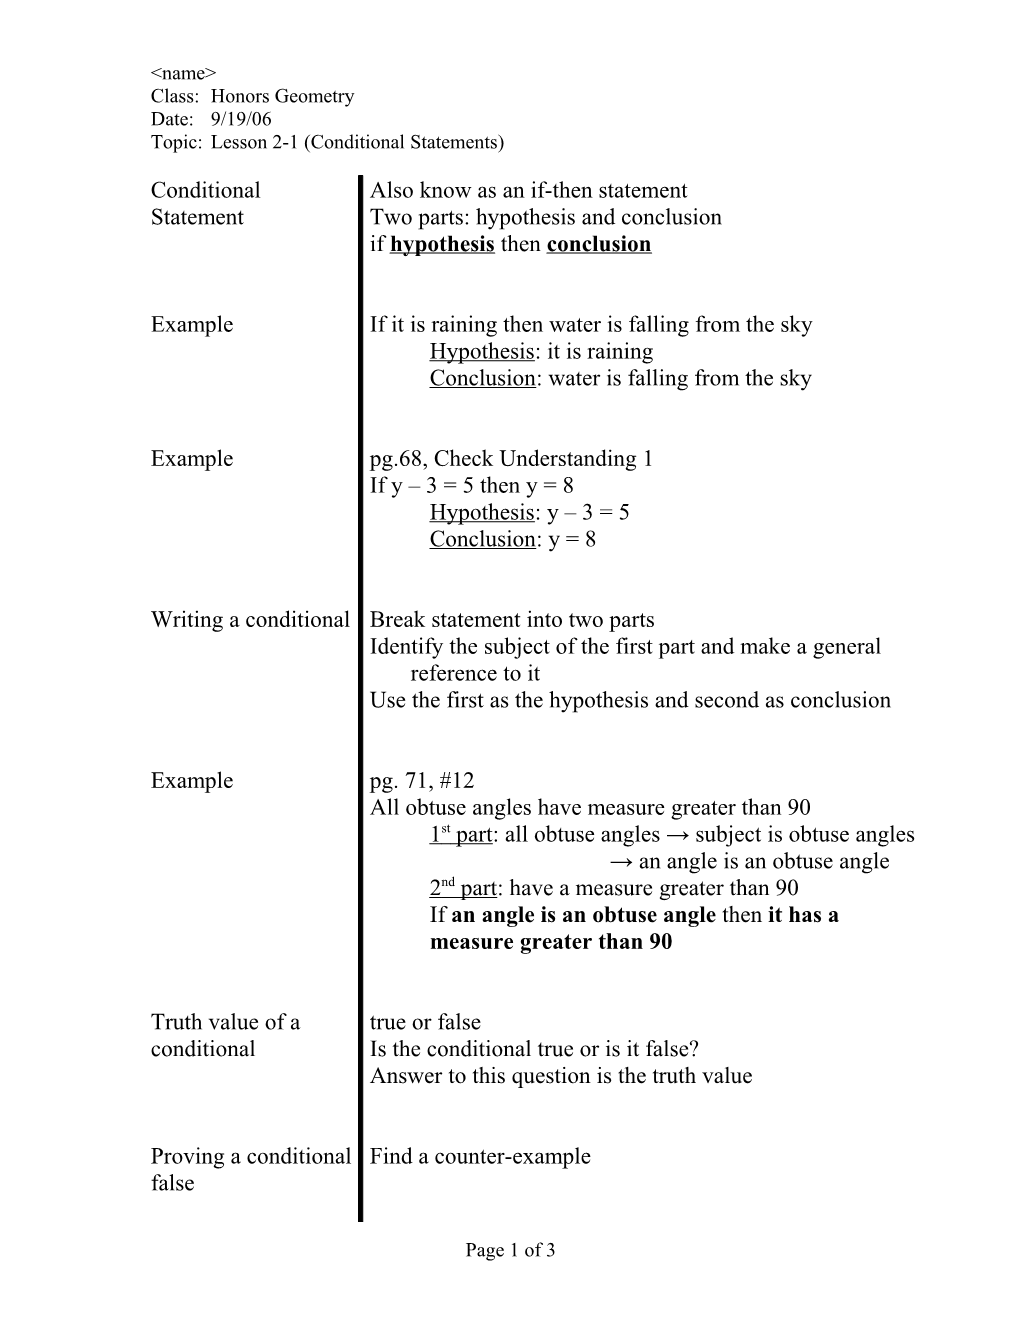 Topic: Lesson 2-1 (Conditional Statements)